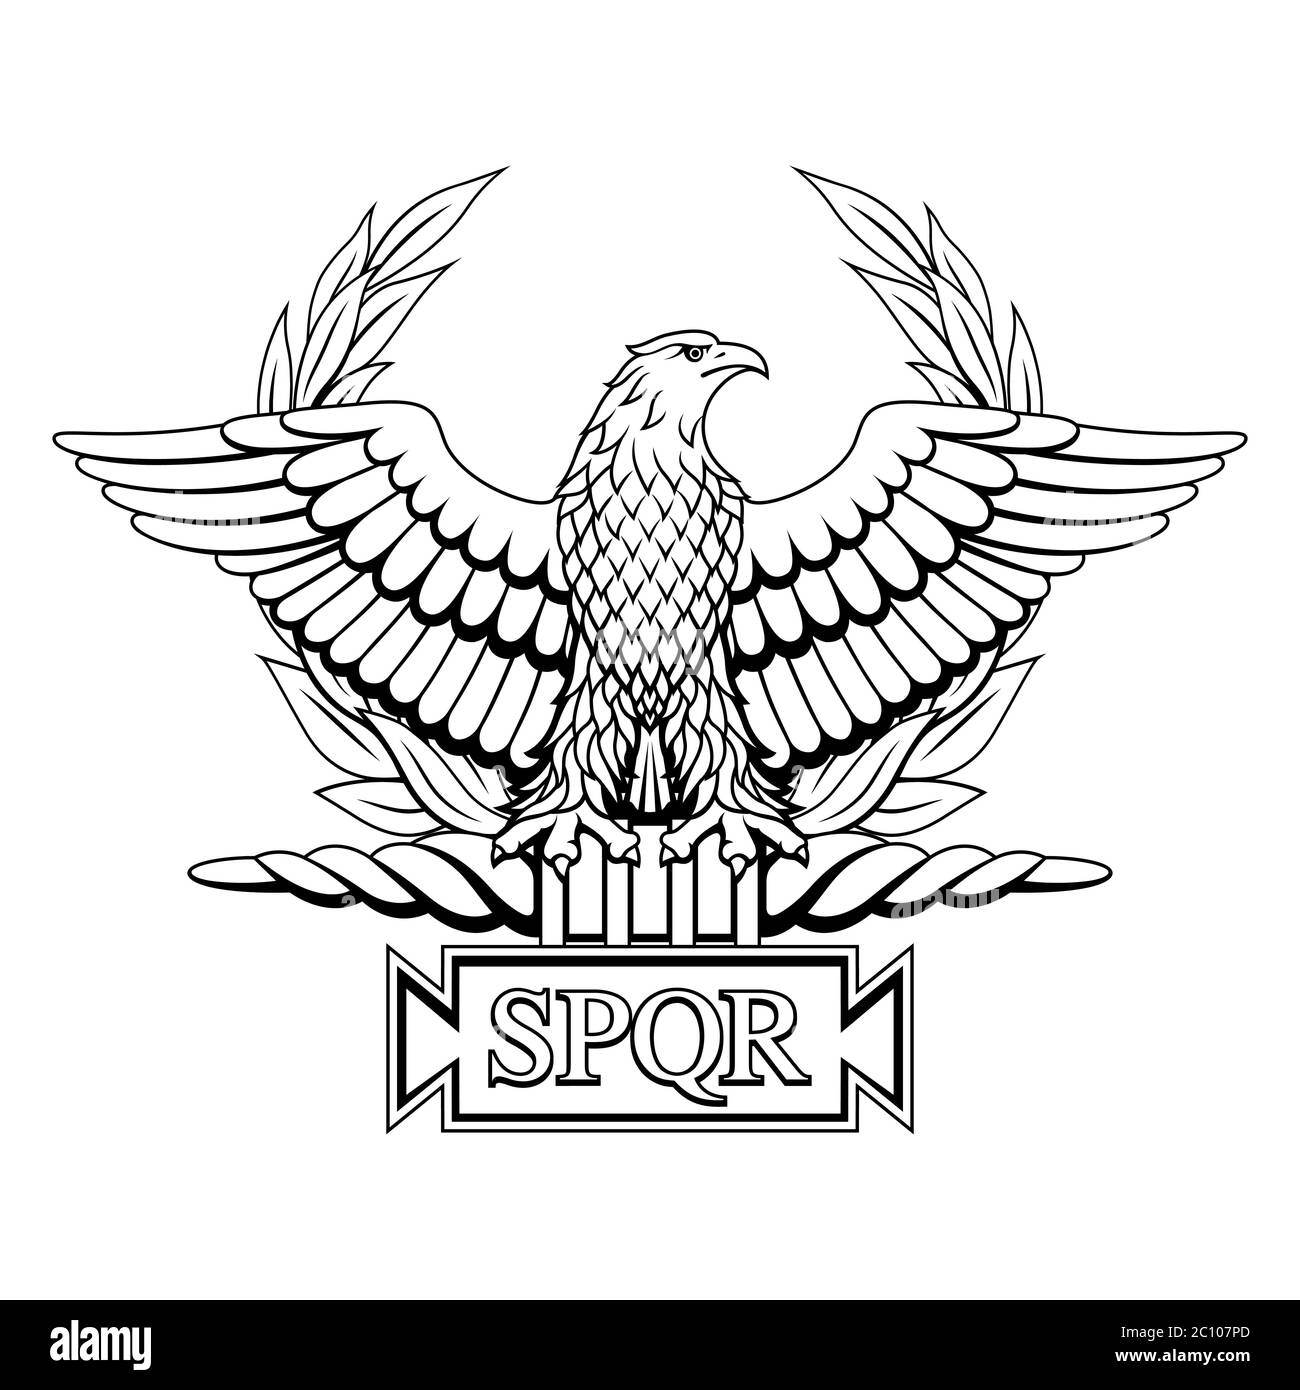 Roman Eagle with the inscription S.P.Q.R. - Senatus Populus Que Romanus, that in Italian means The Senate and the People of Rome. Stock Vector